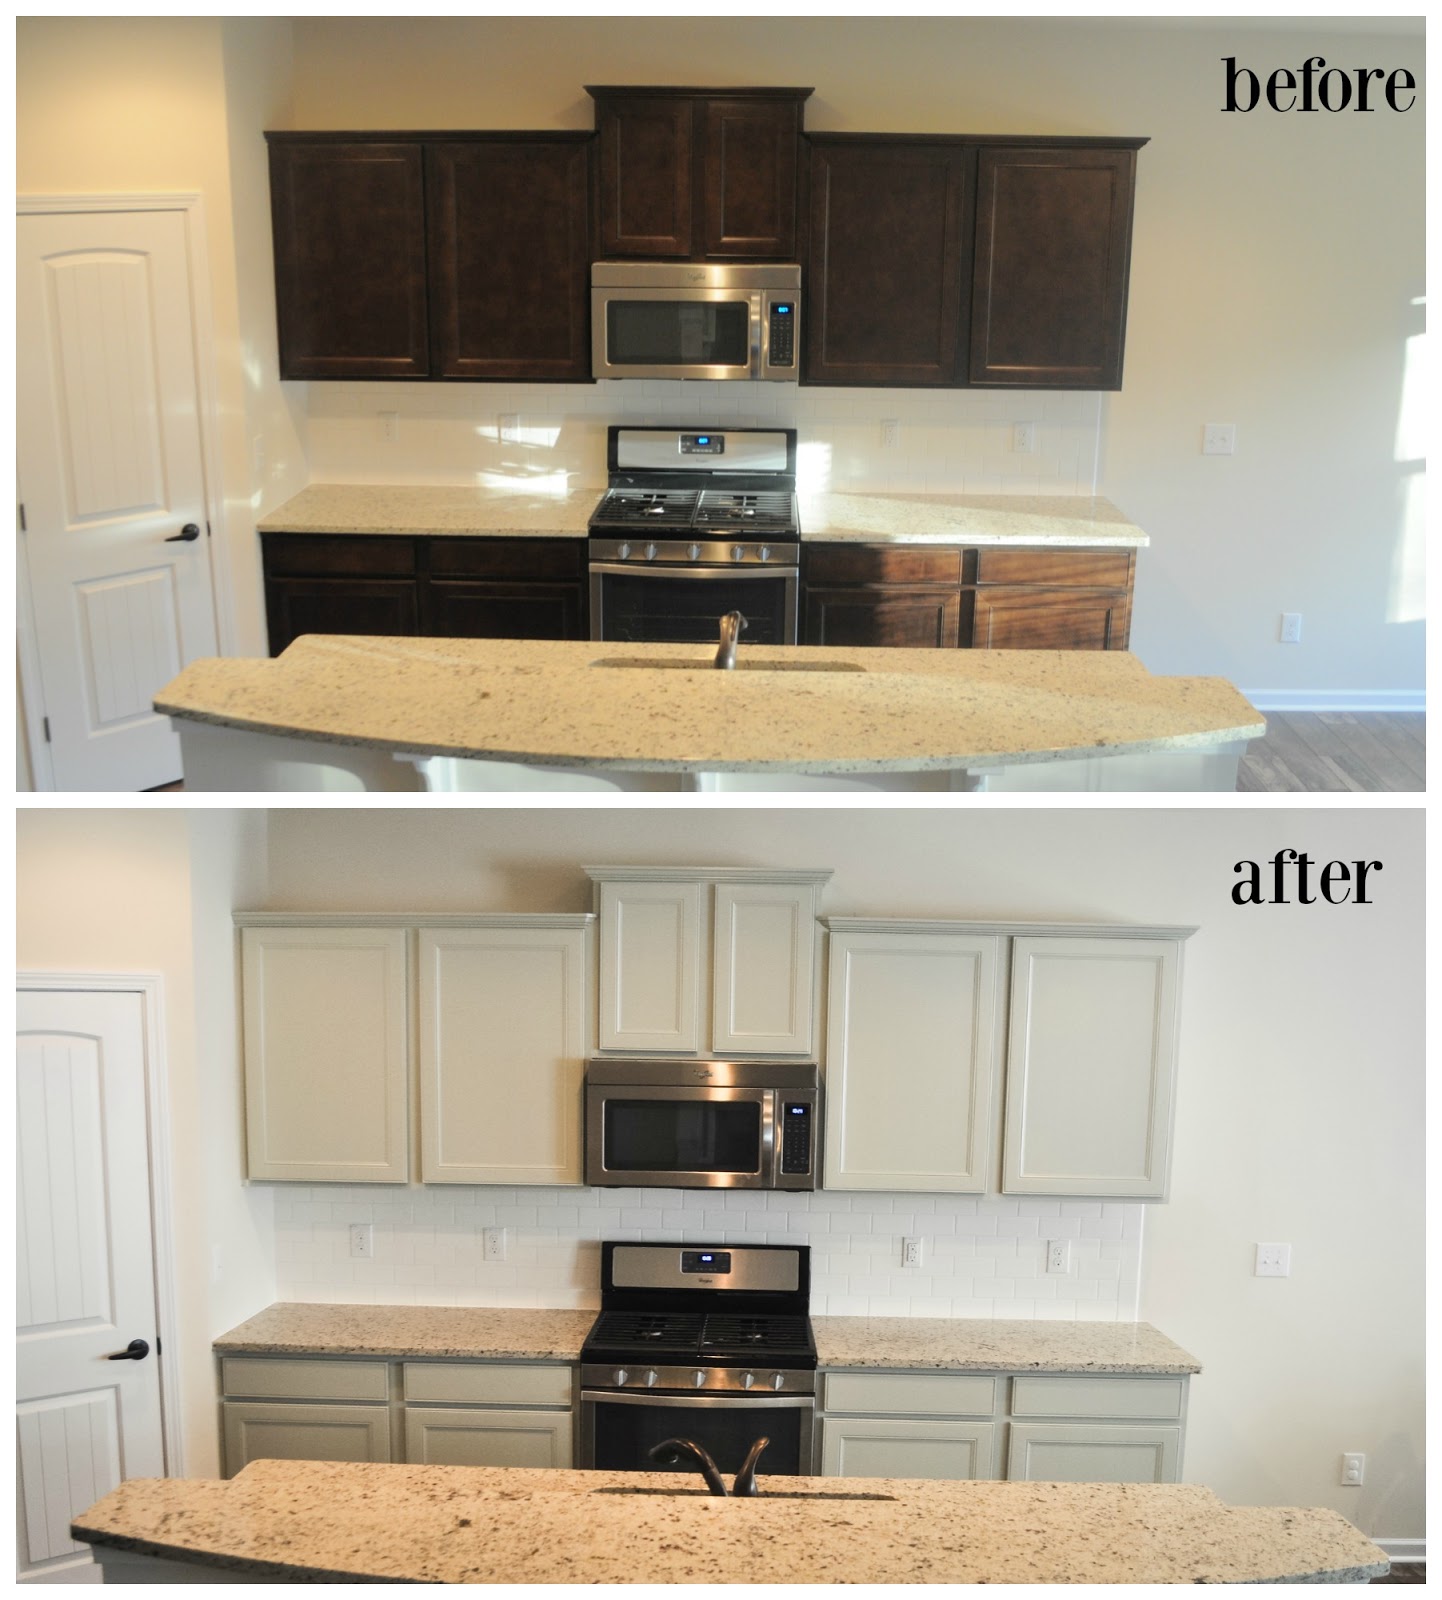 We Painted Our Brand New Kitchen Cabinets and Here\u002639;s How it Turned Out  Pretty Real